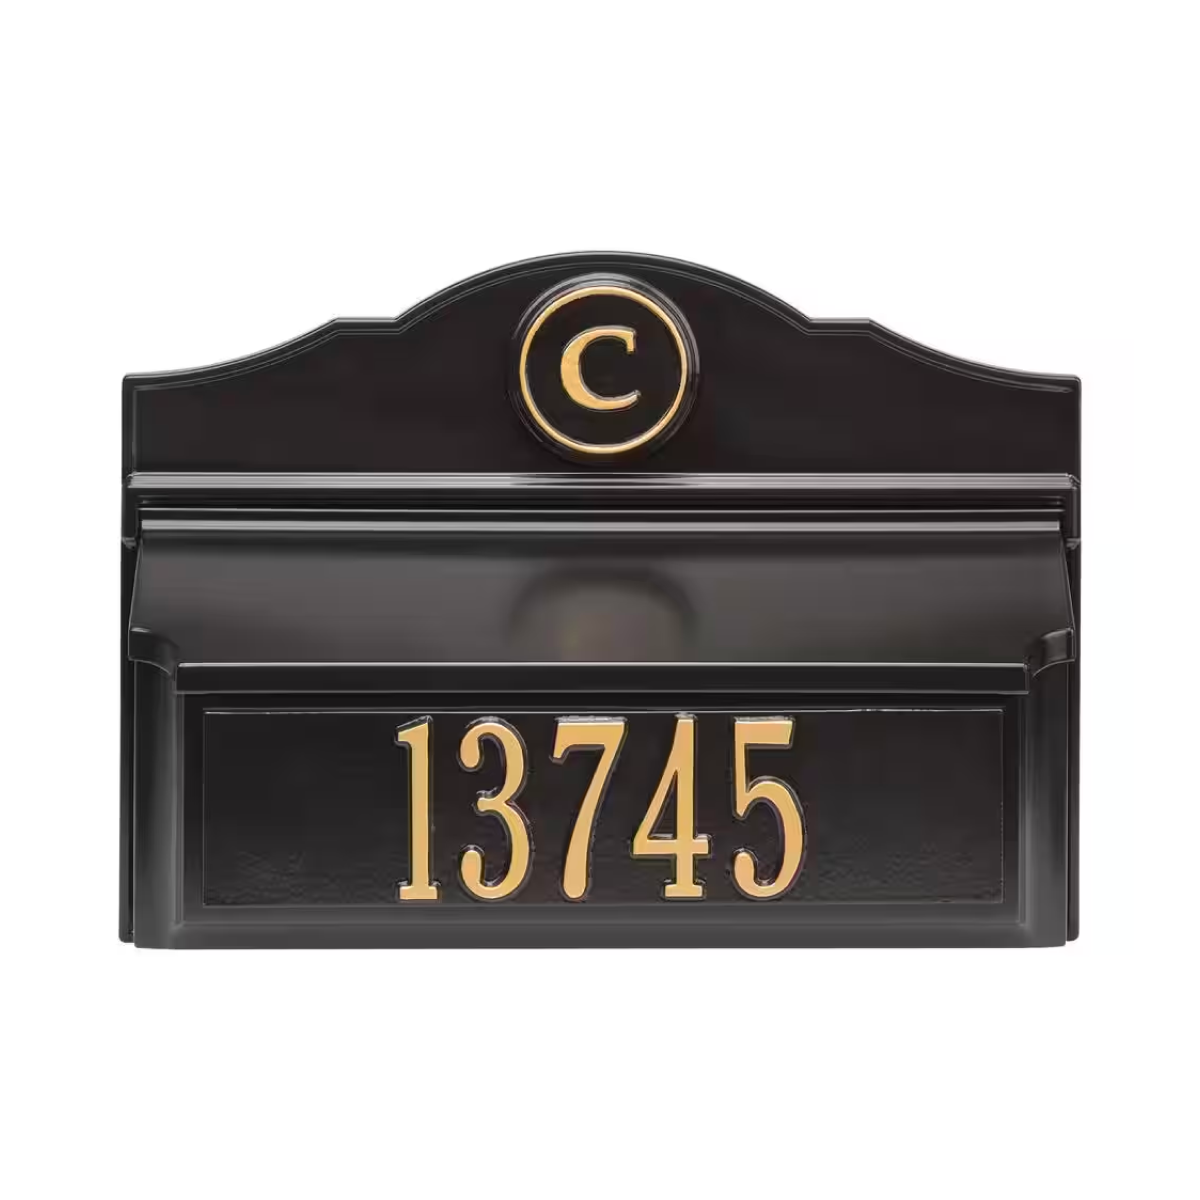 Whitehall Colonial Wall Mount Mailbox Package 1 (Mailbox, Plaque & Monogram) Product Image